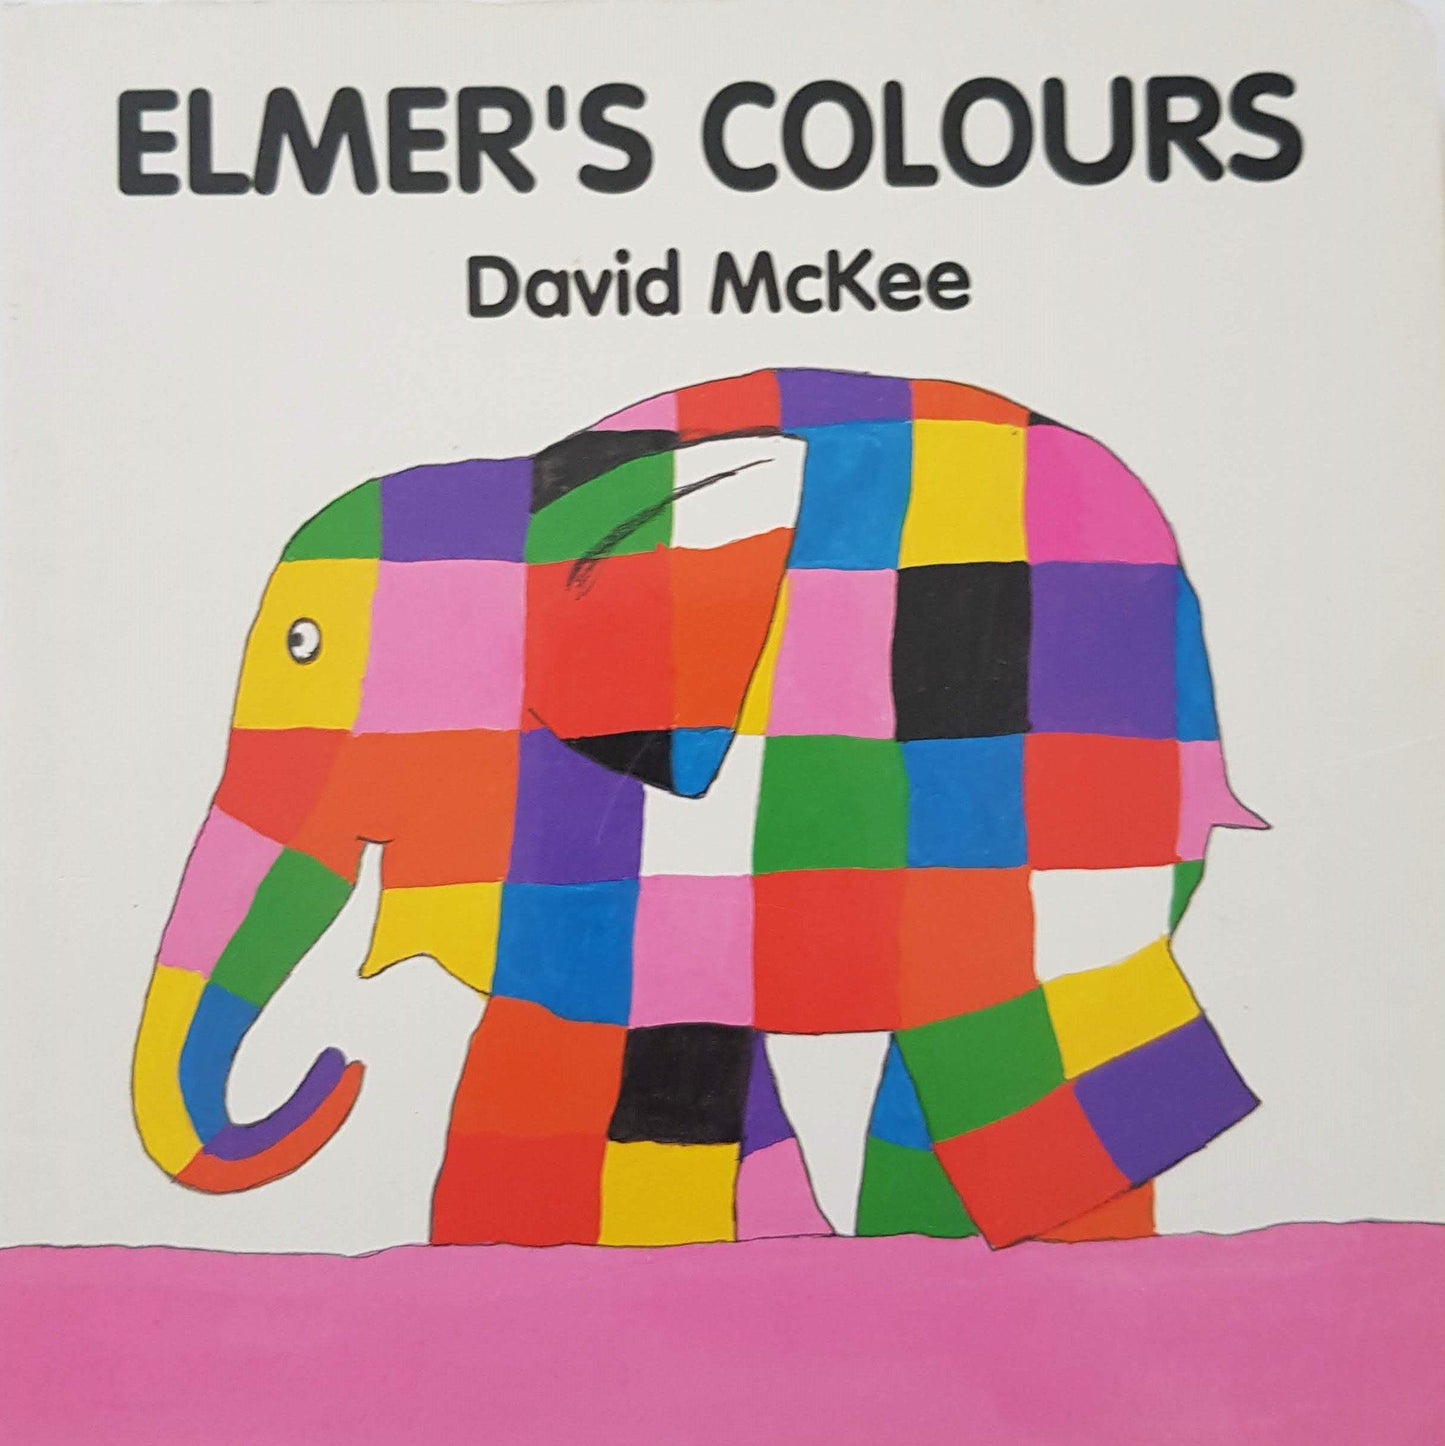 Elmer's Colour Like New Not Applicable  (4593185161271)